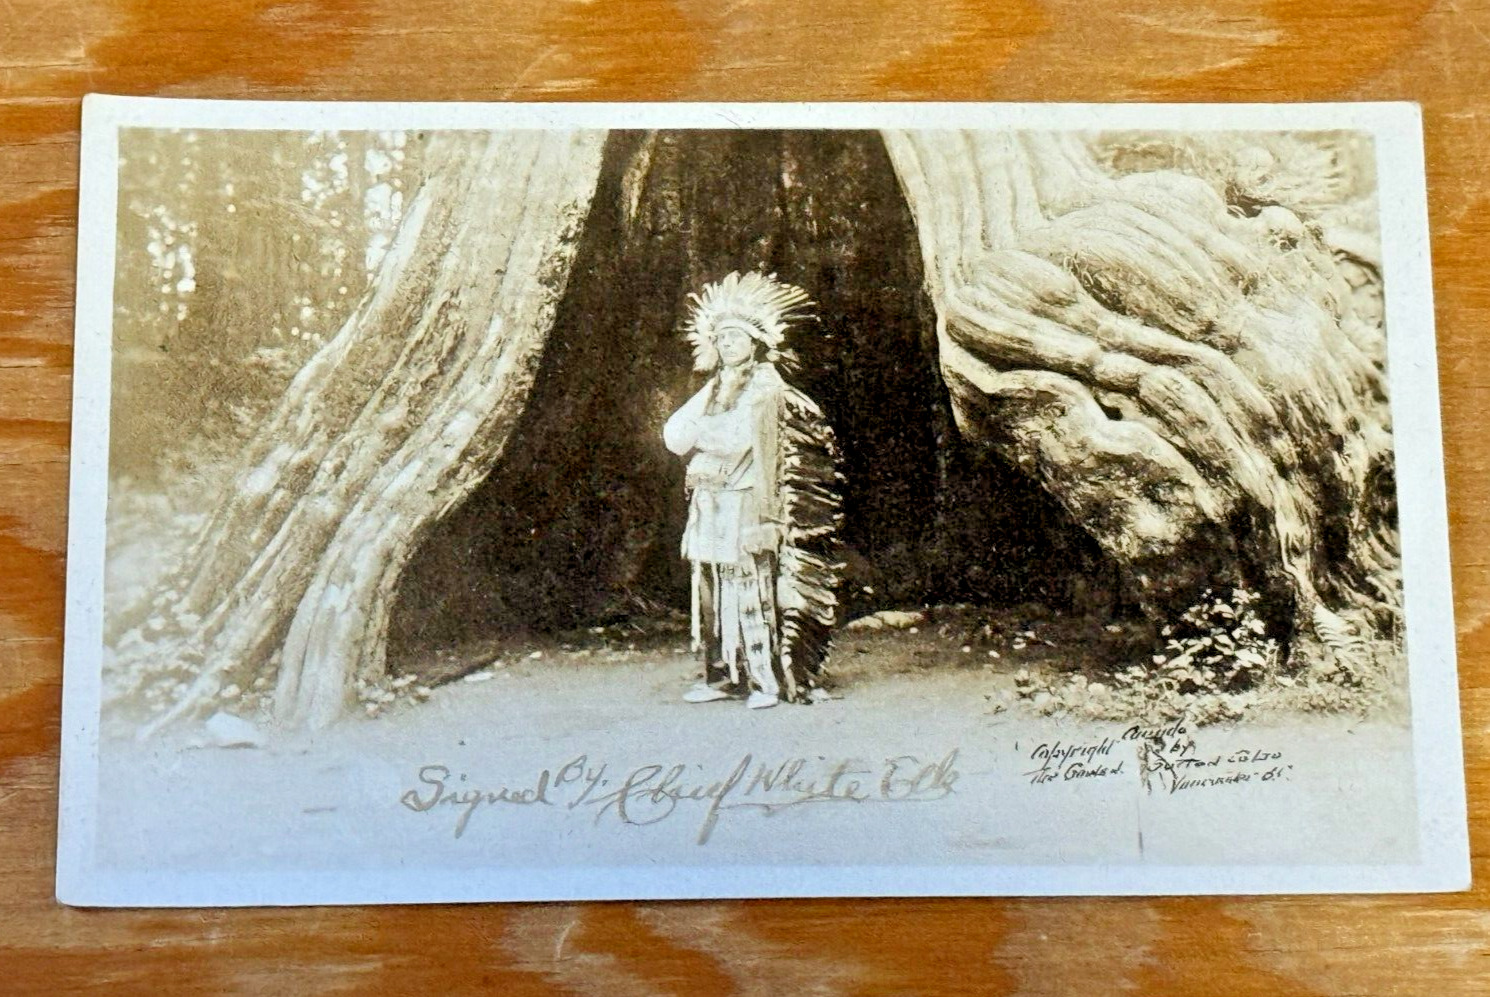 VANCOUVER BC Canada RPPC Real Photo Indian Postcard / CHIEF WHITE ELK c1930s